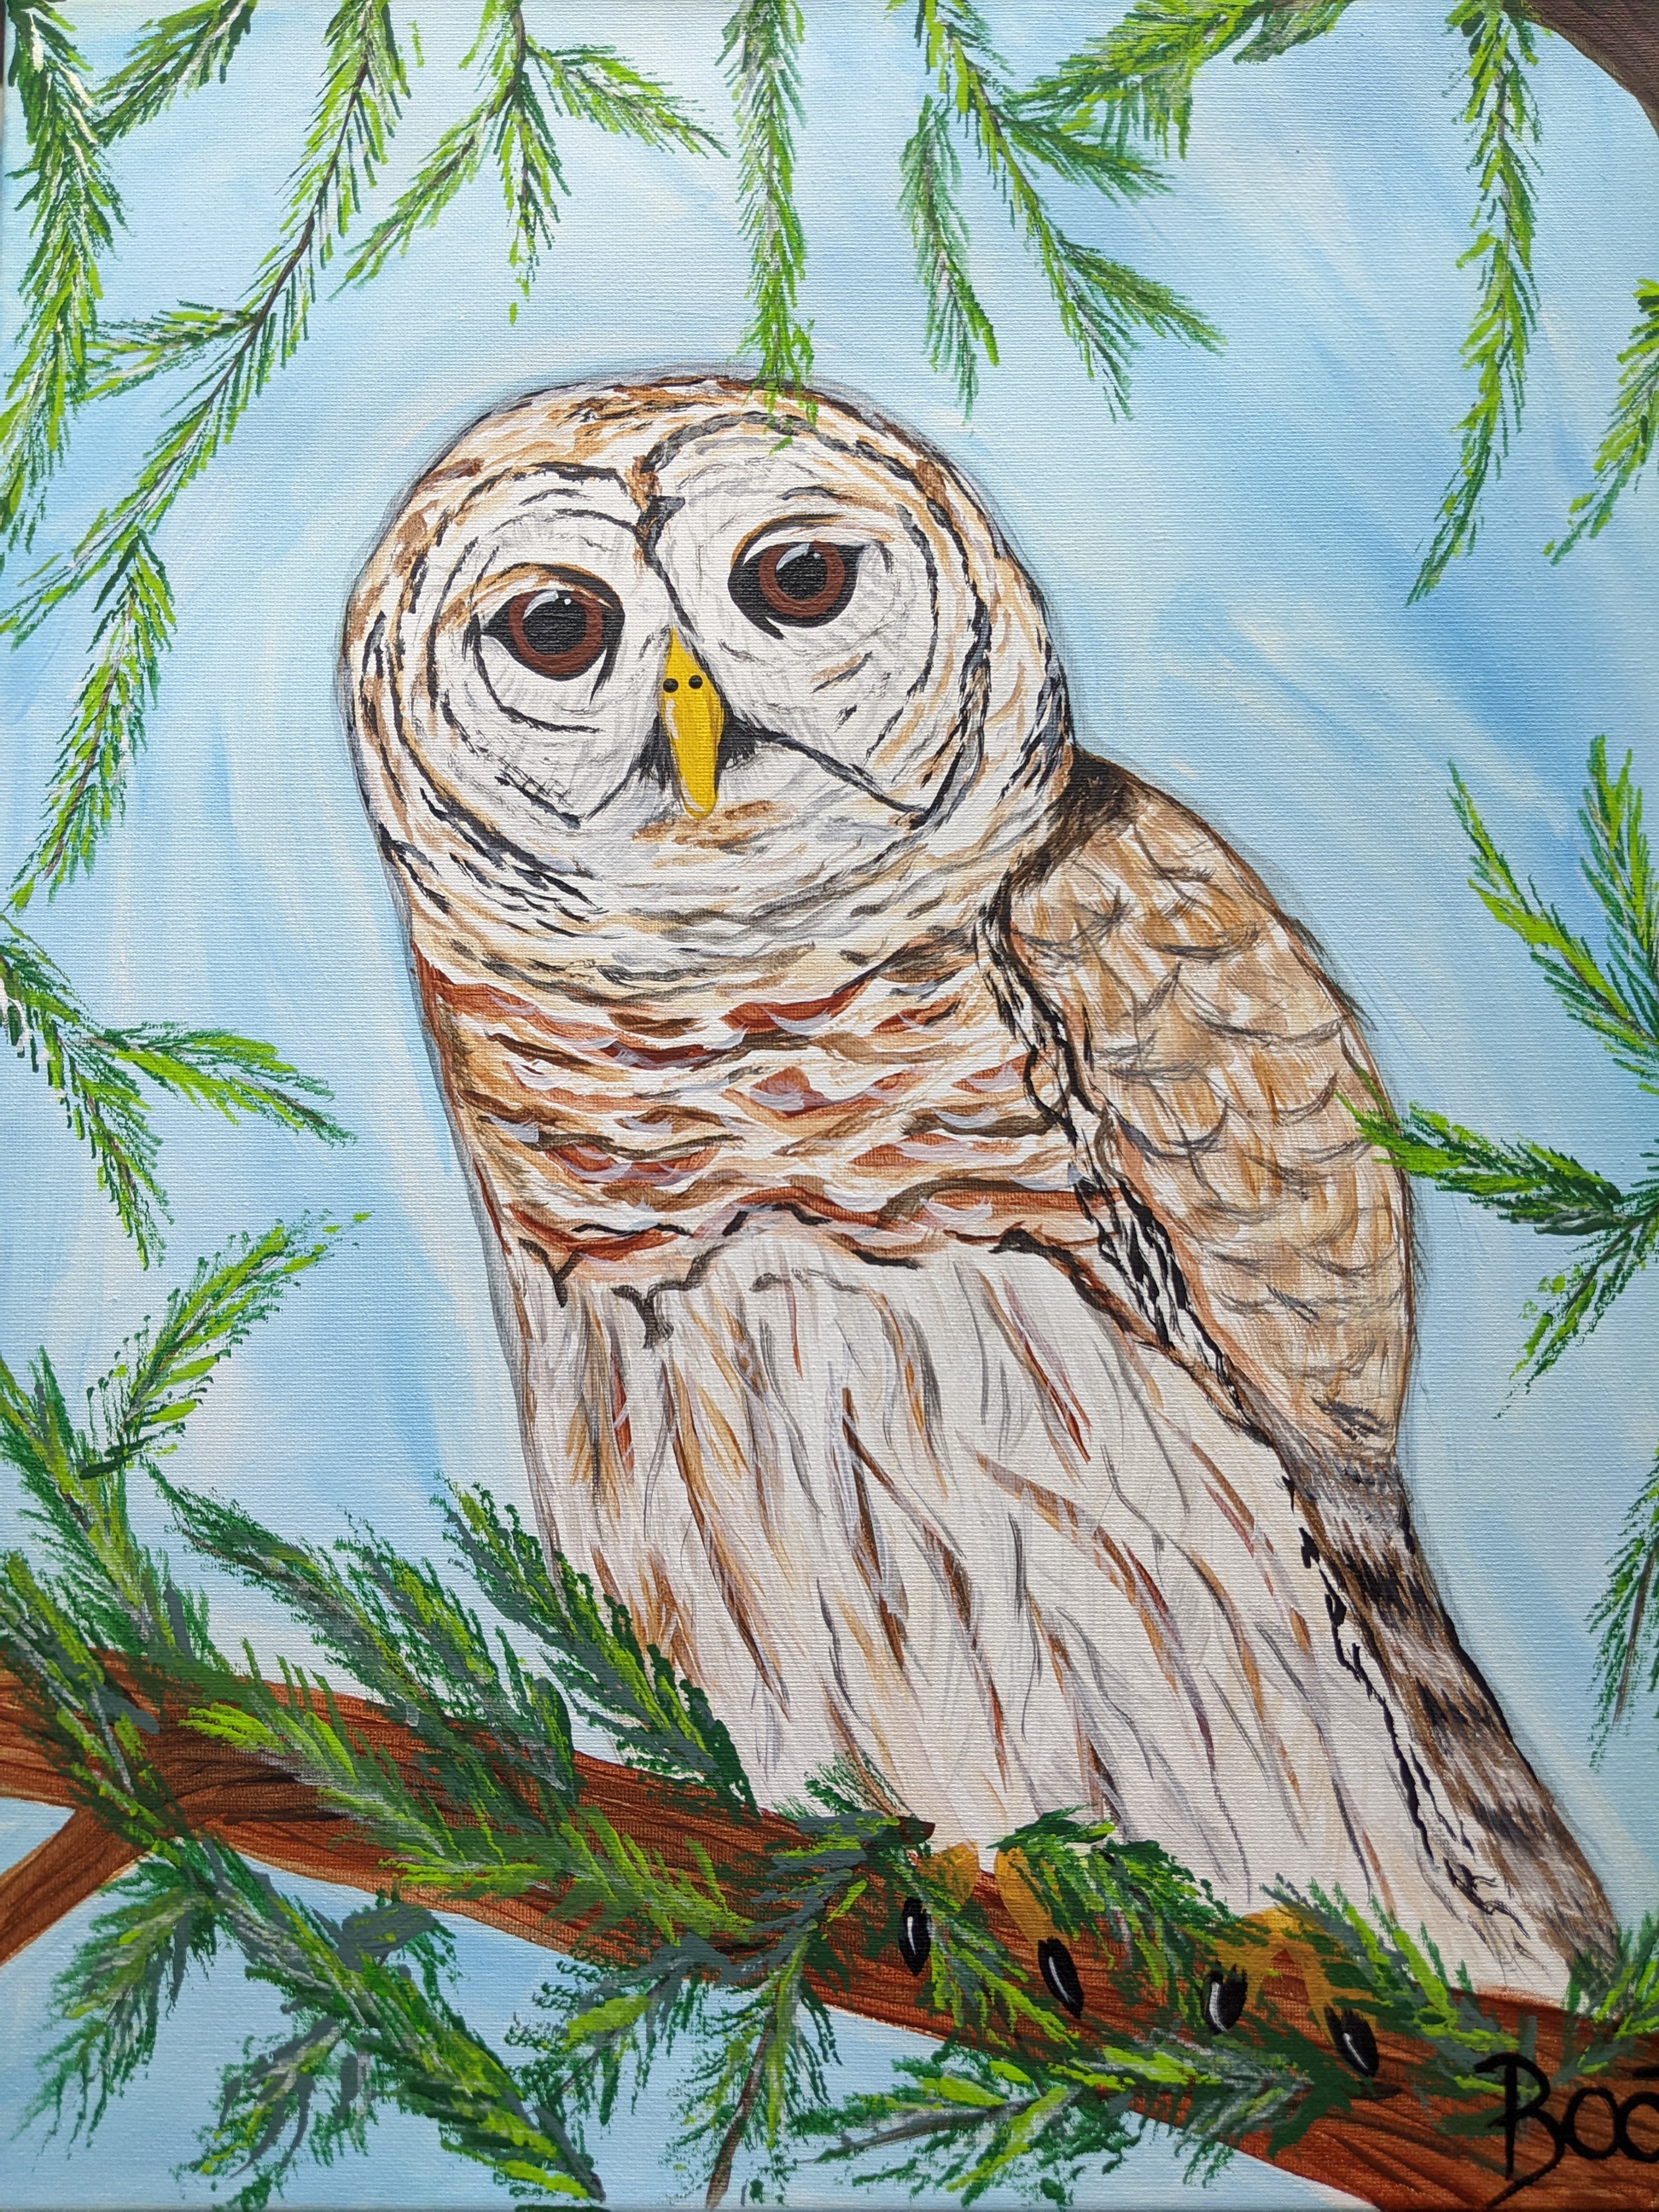 Painted Owl 2